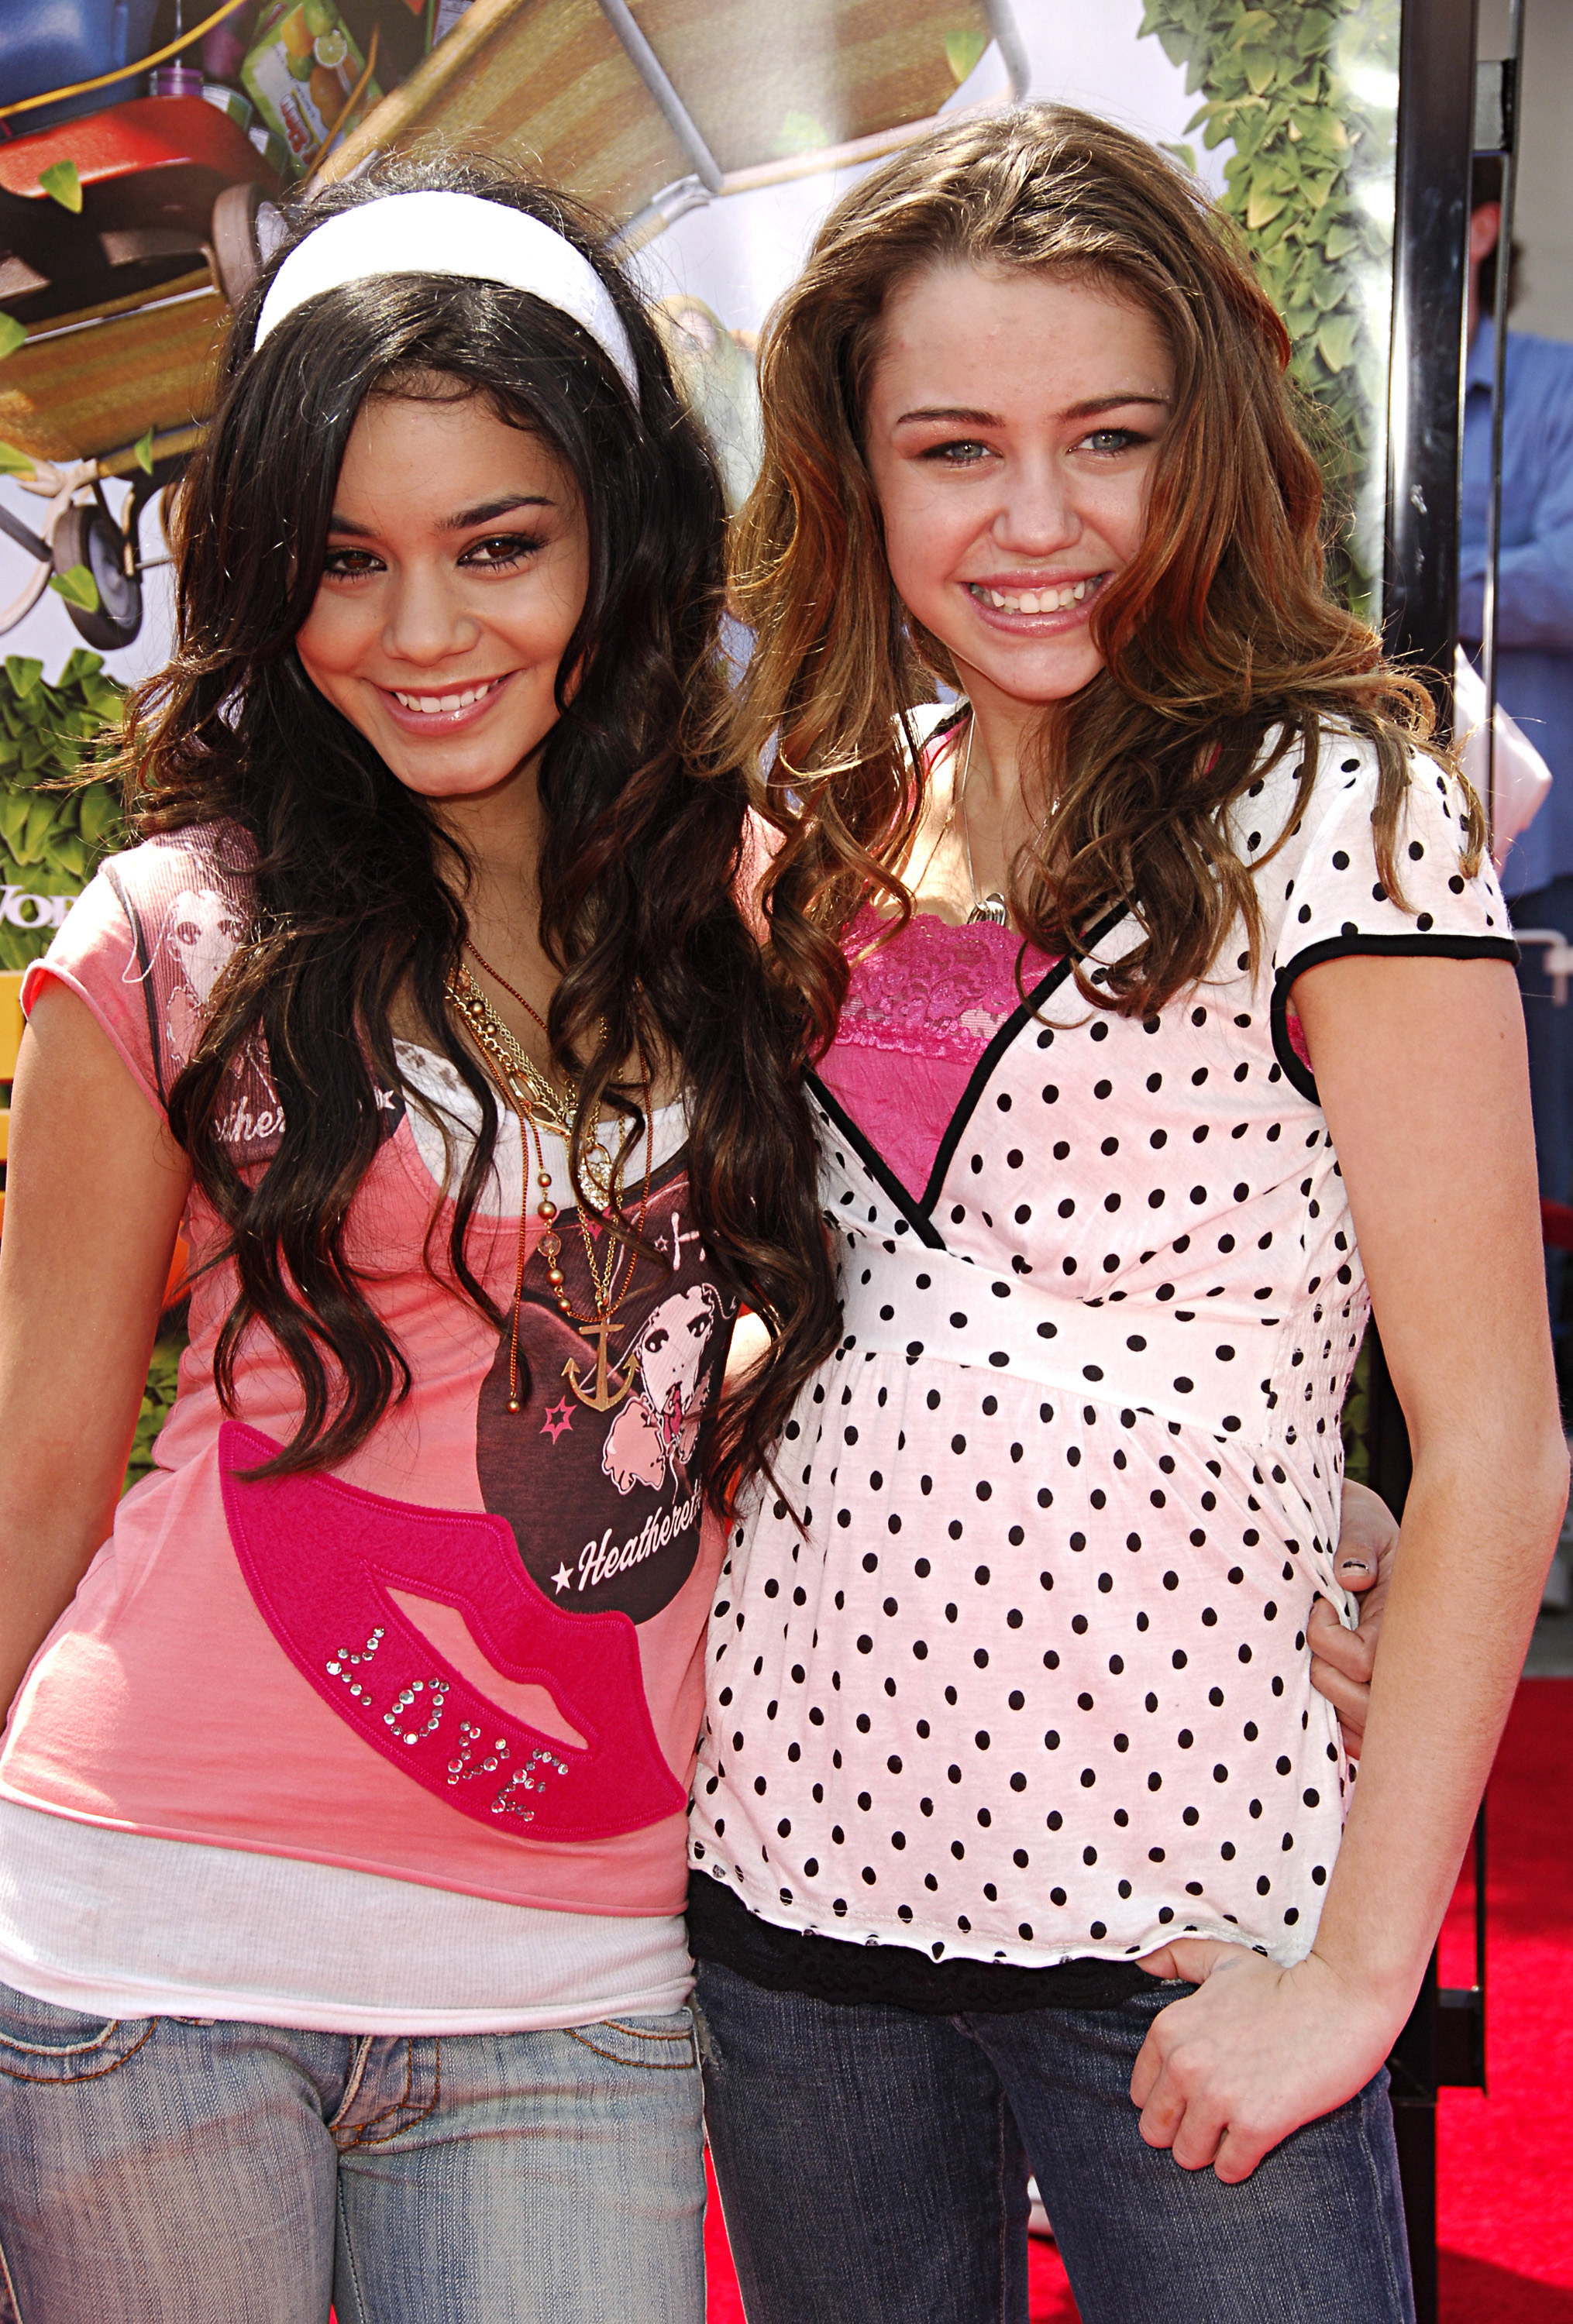 Vanessa Hudgens and Miley Cyrus wearing low-cut tops over camis